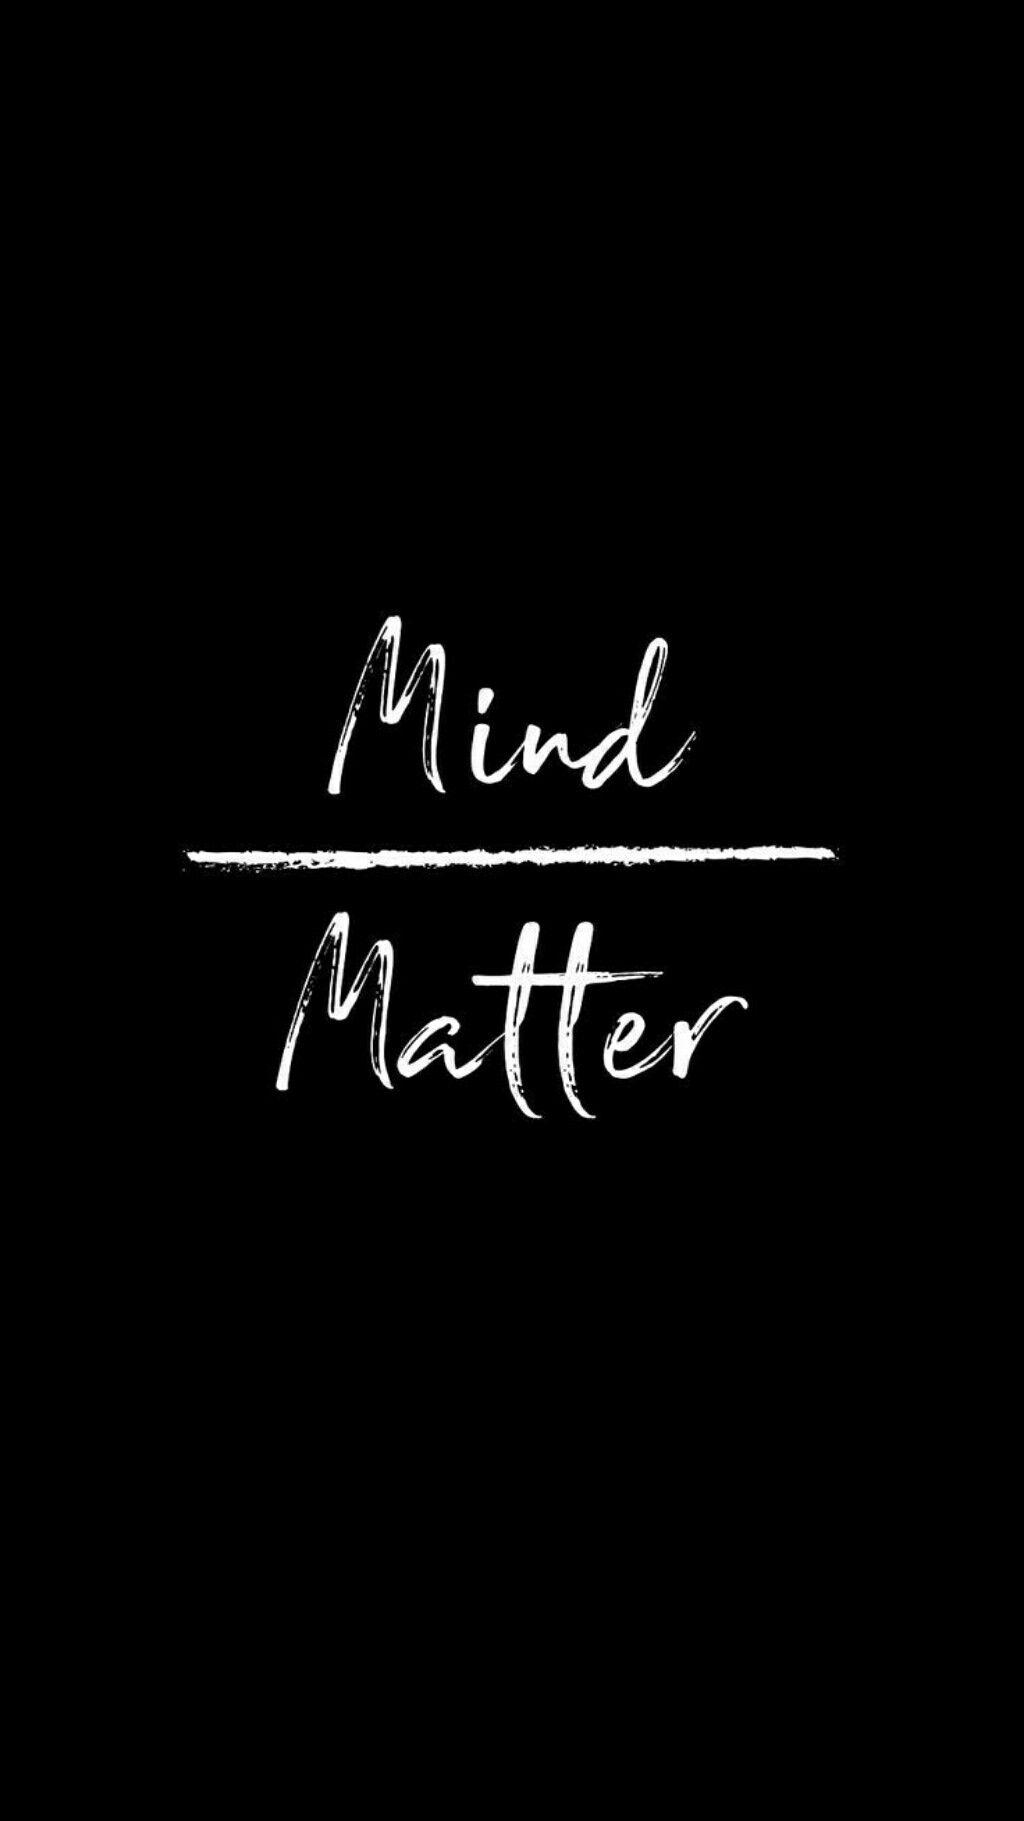 Mind over matter. wallpaper. Wallpaper quotes, Mindfulness, Quotes